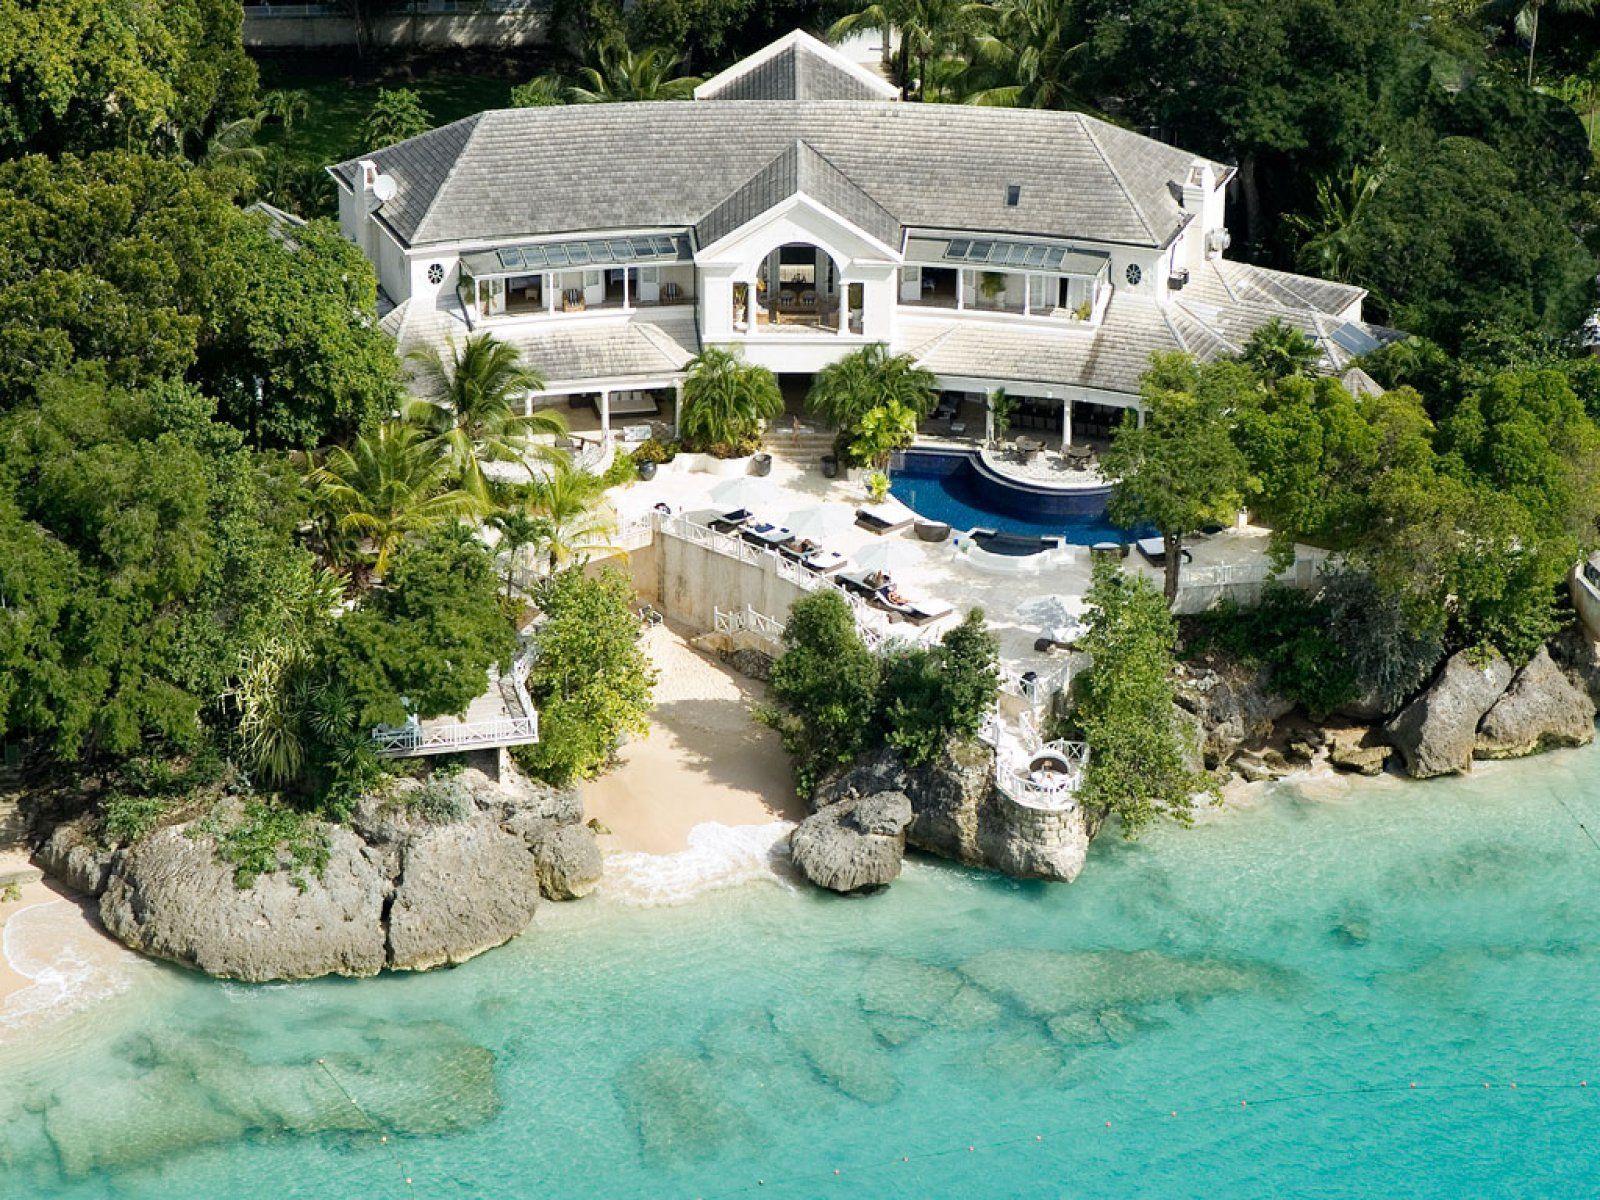 Spring house in barbados wallpaper and image